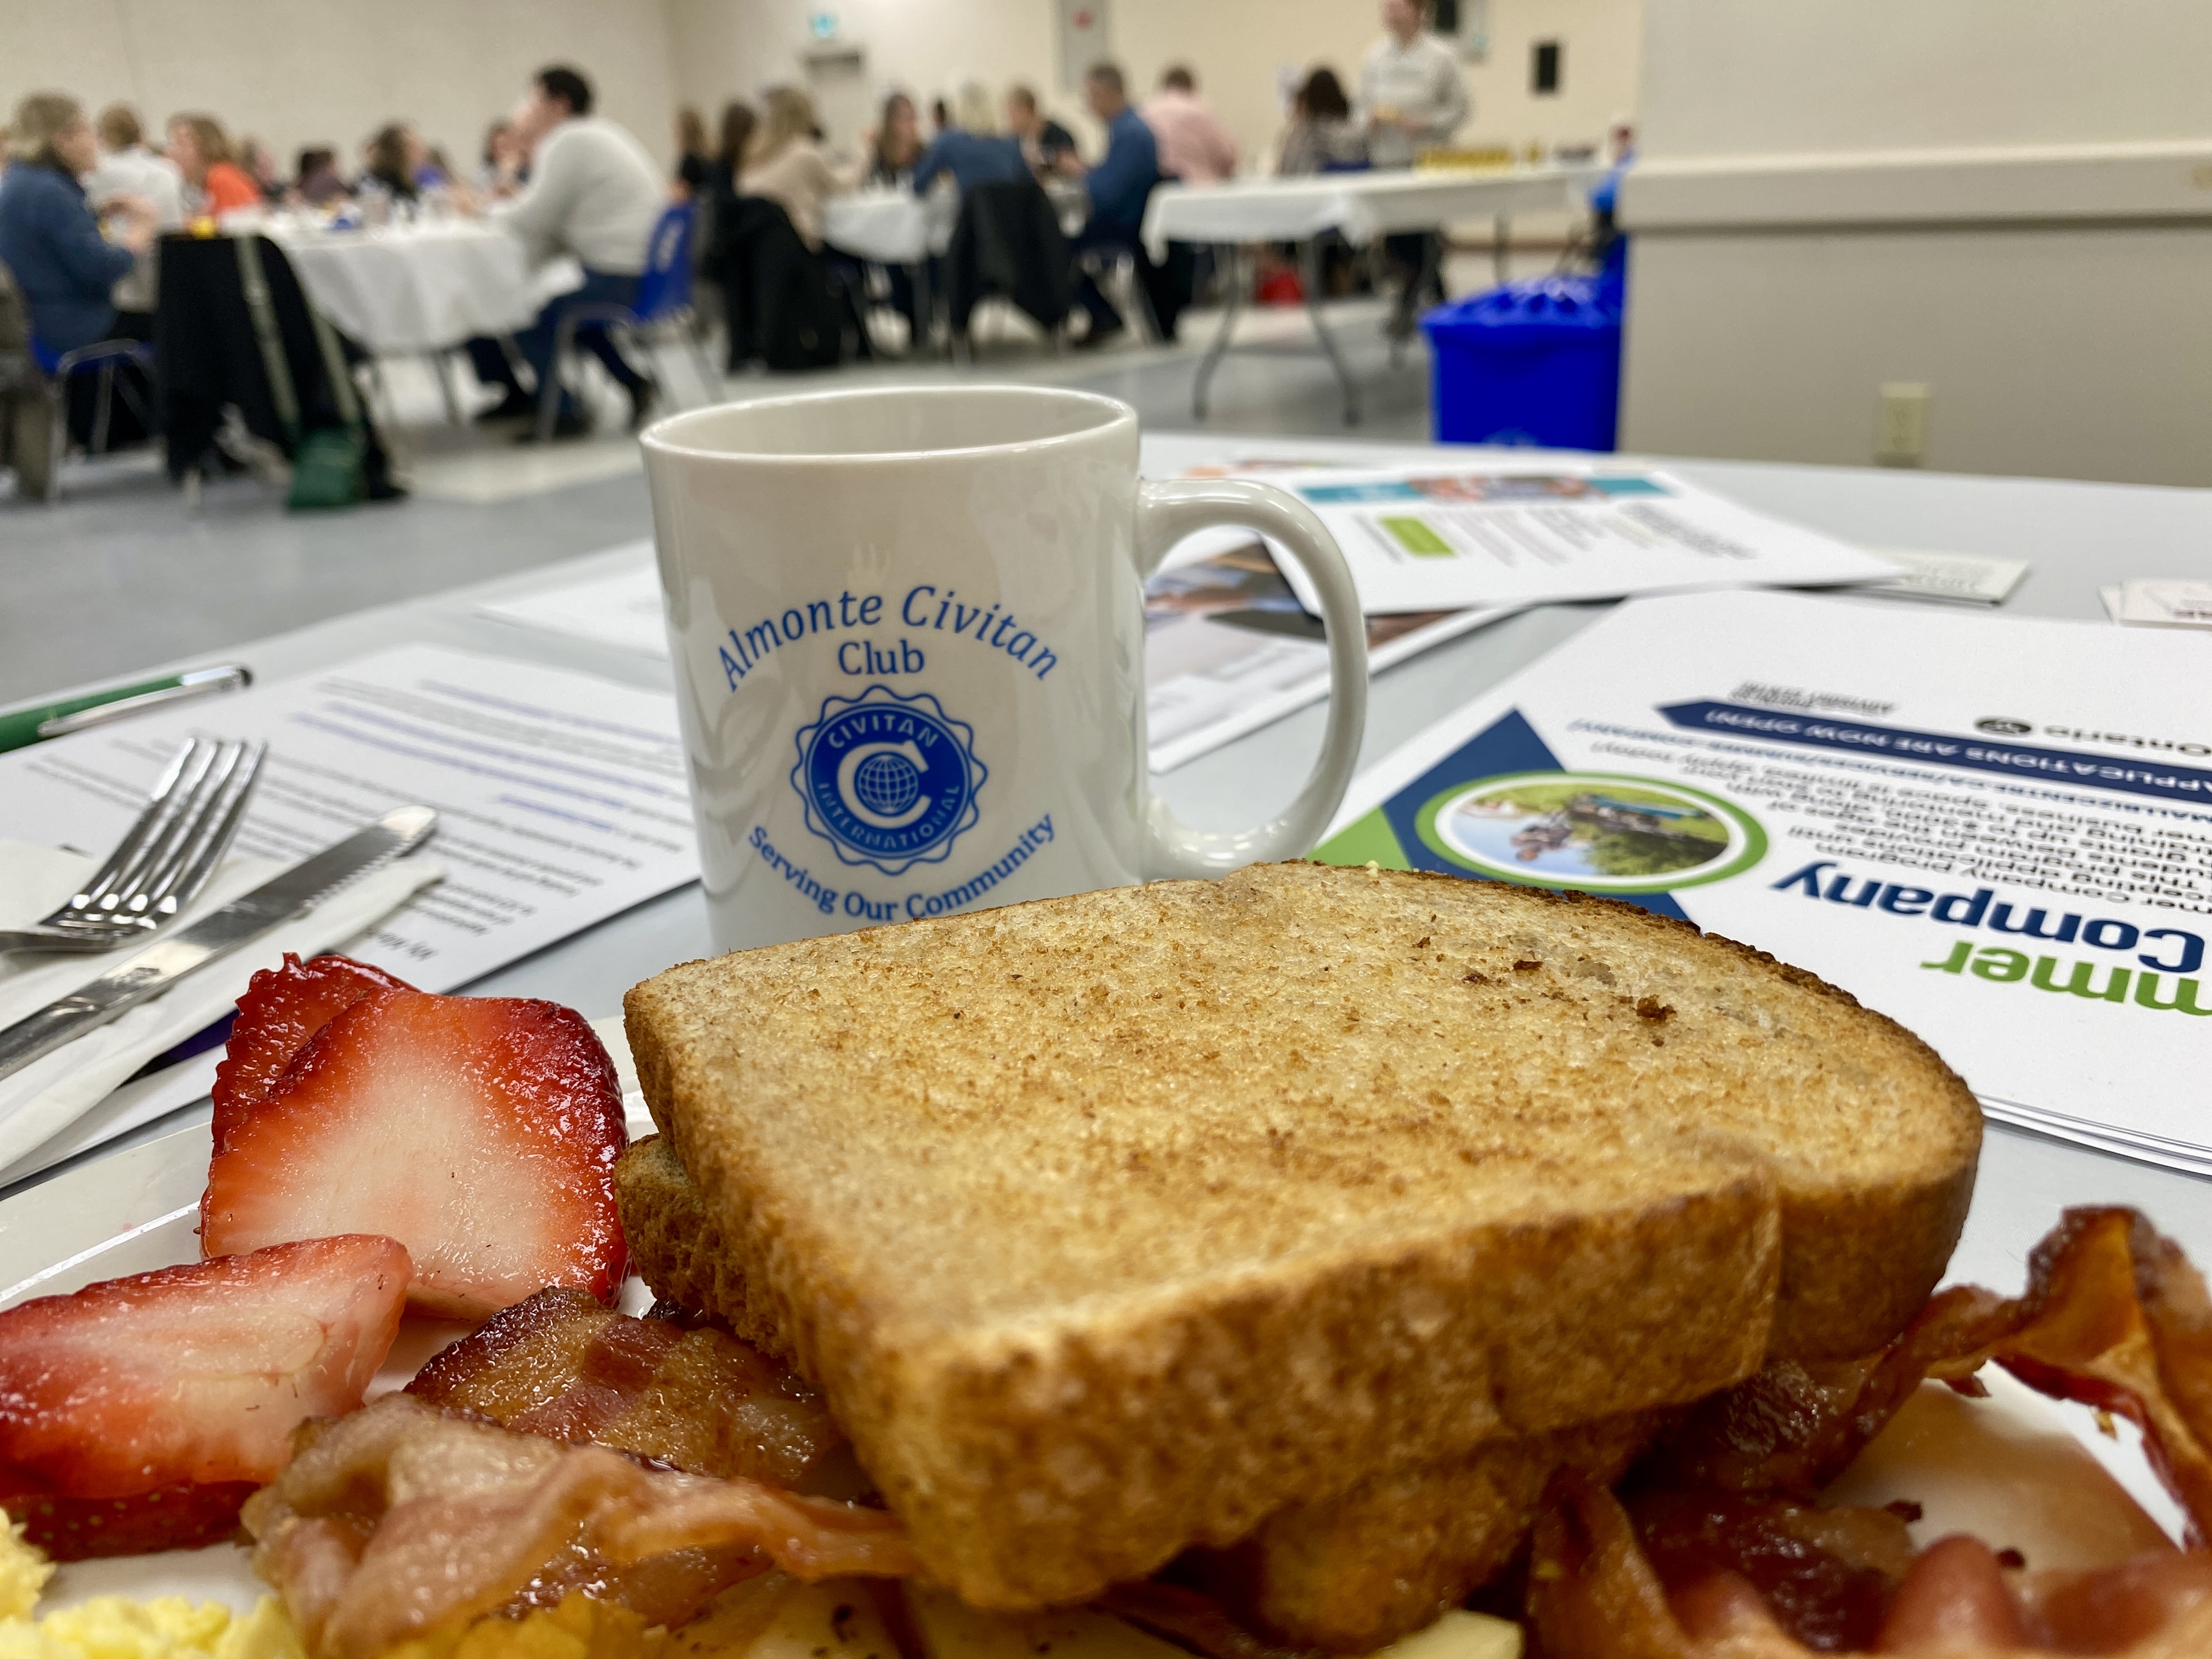 Close up of plate with toast, strawberries and bacon. White mug with blue lettering 'Almonte Civitan Club' sits in front.